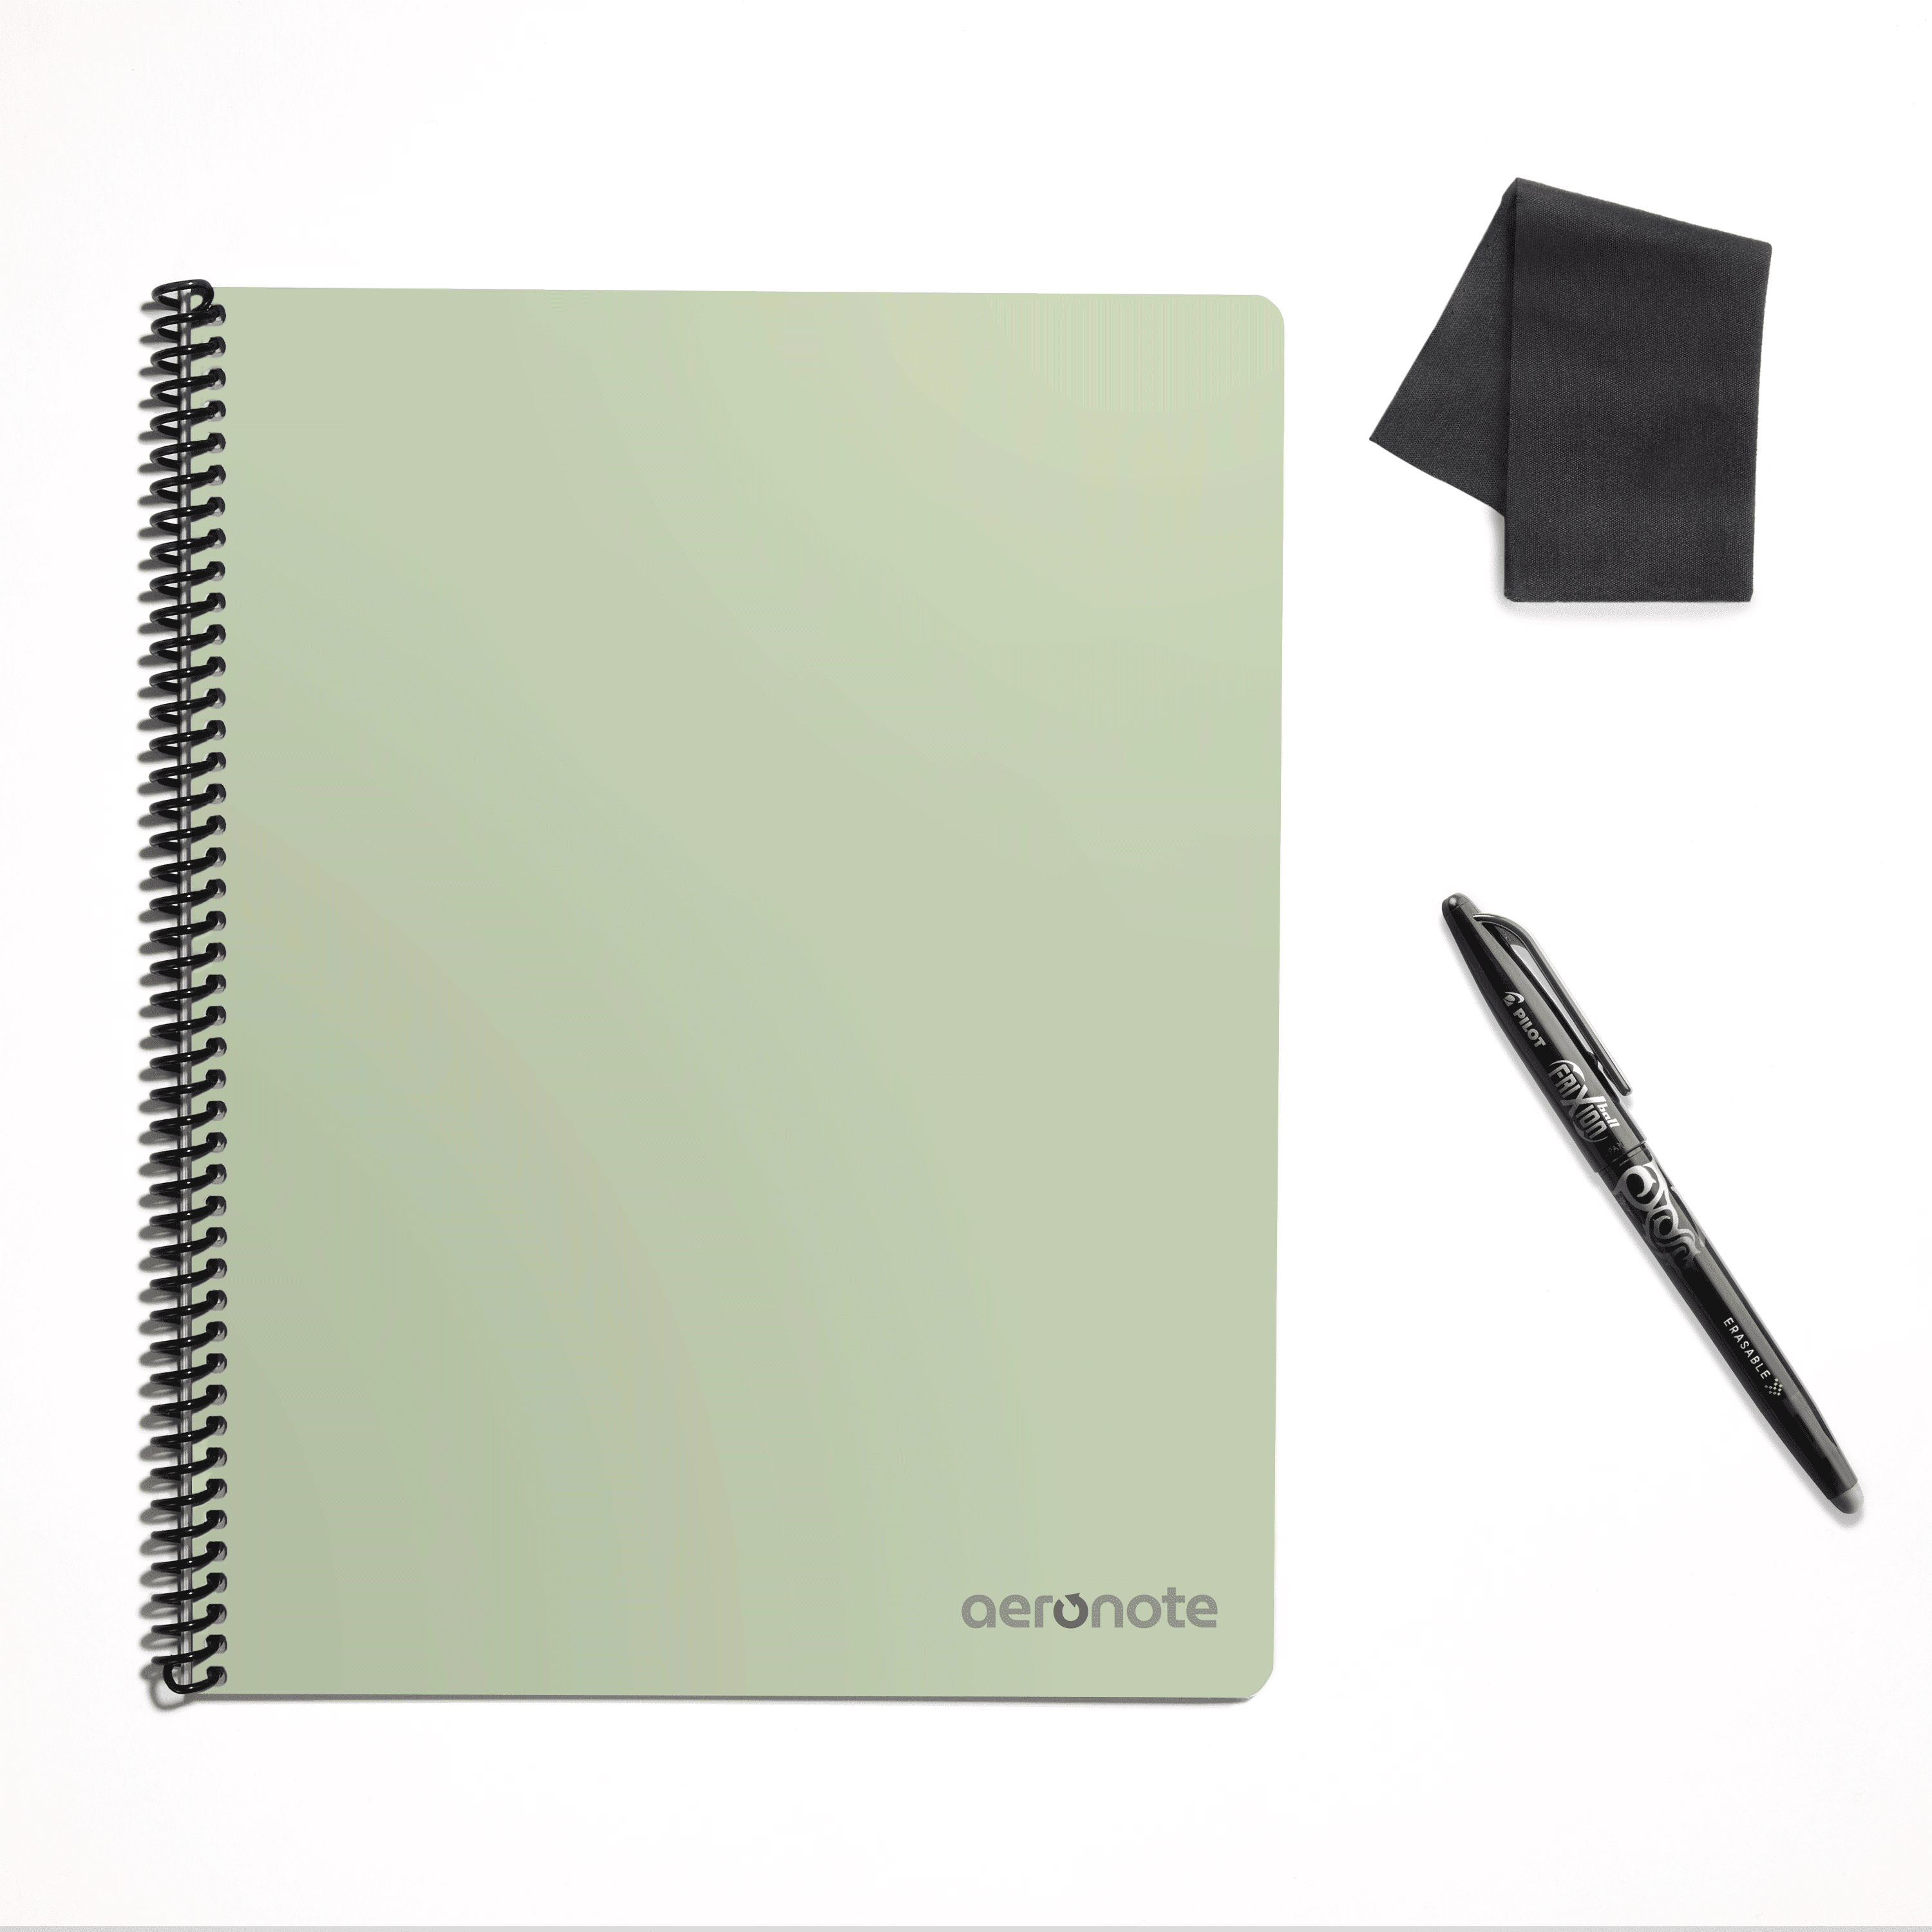 Rocketbook Notebooks, Pens and More Are 20% Off During Its Back-to-School  Sale - CNET